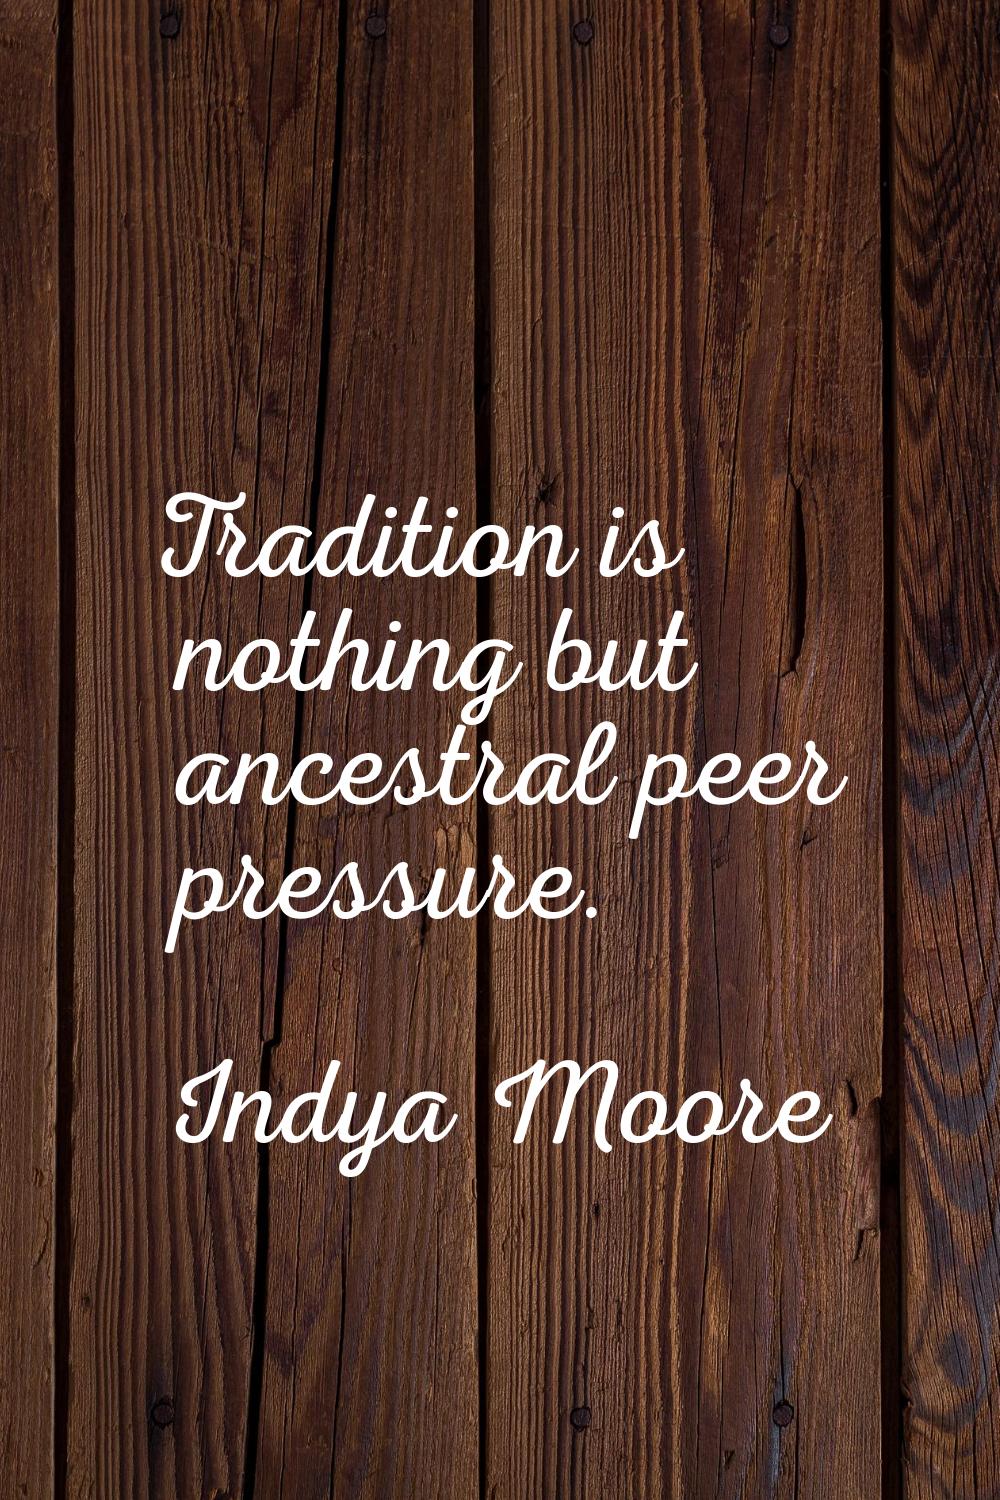 Tradition is nothing but ancestral peer pressure.